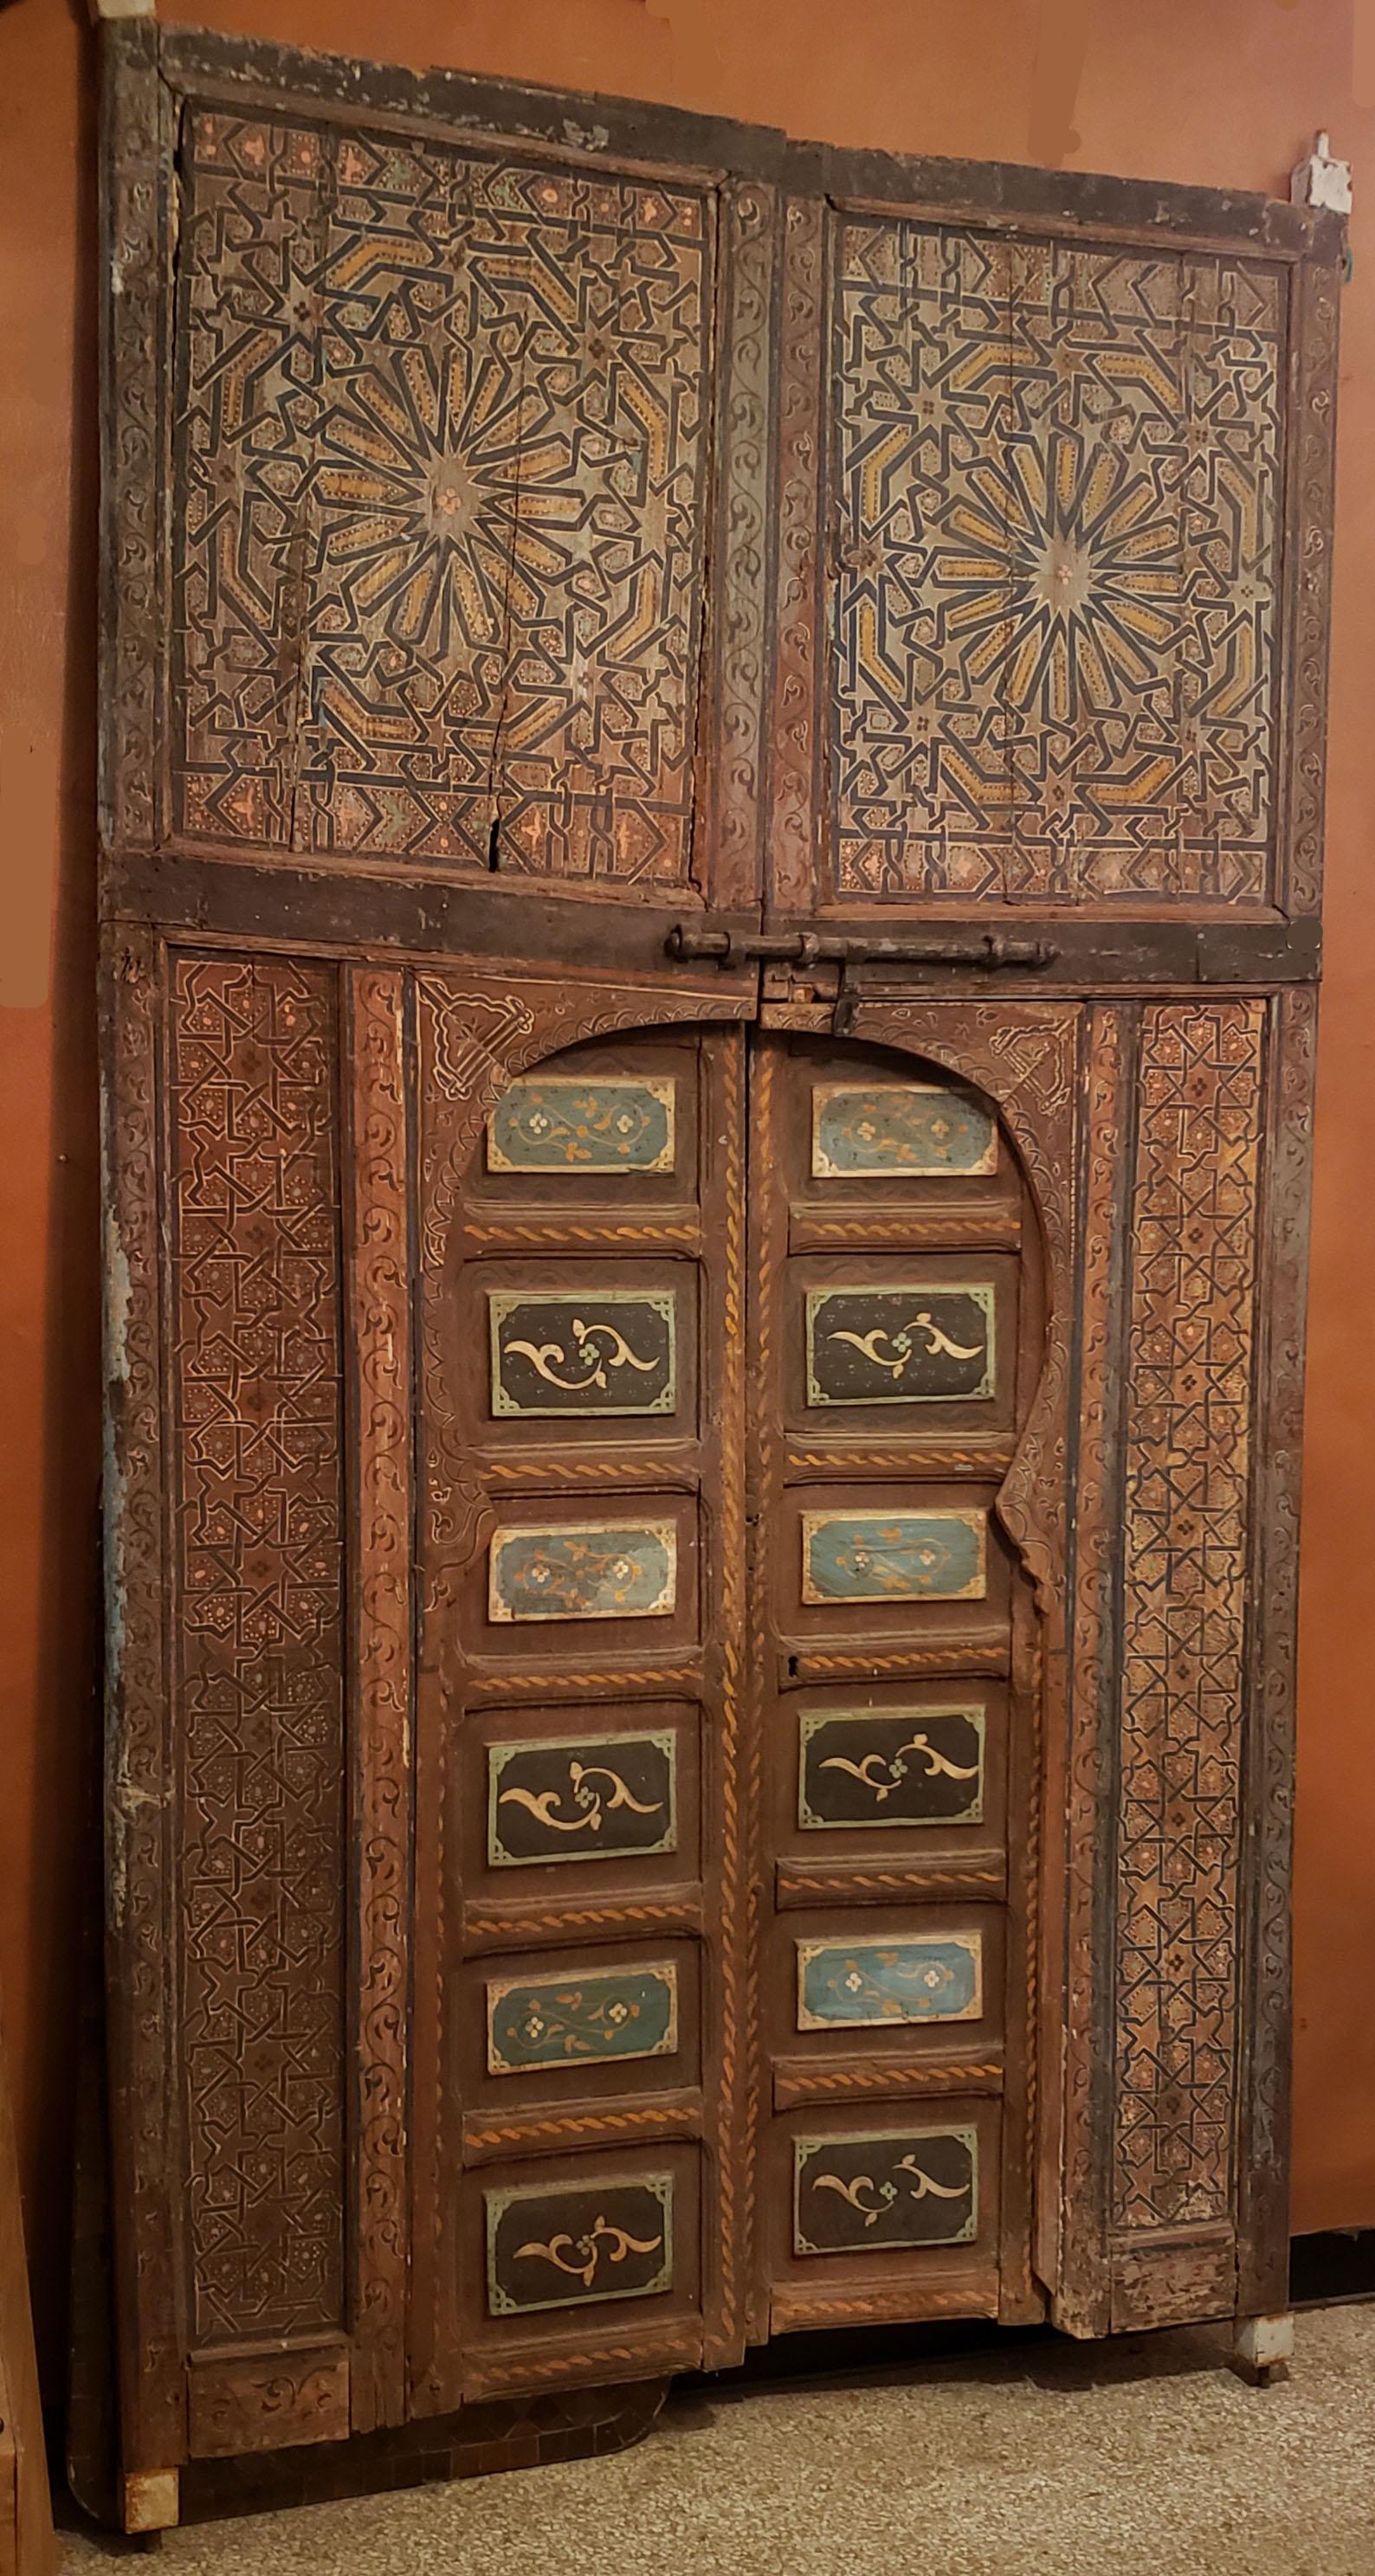 Marrakech Palace Door: 
Very old double panel Moroccan hand painted measuring approximately 103